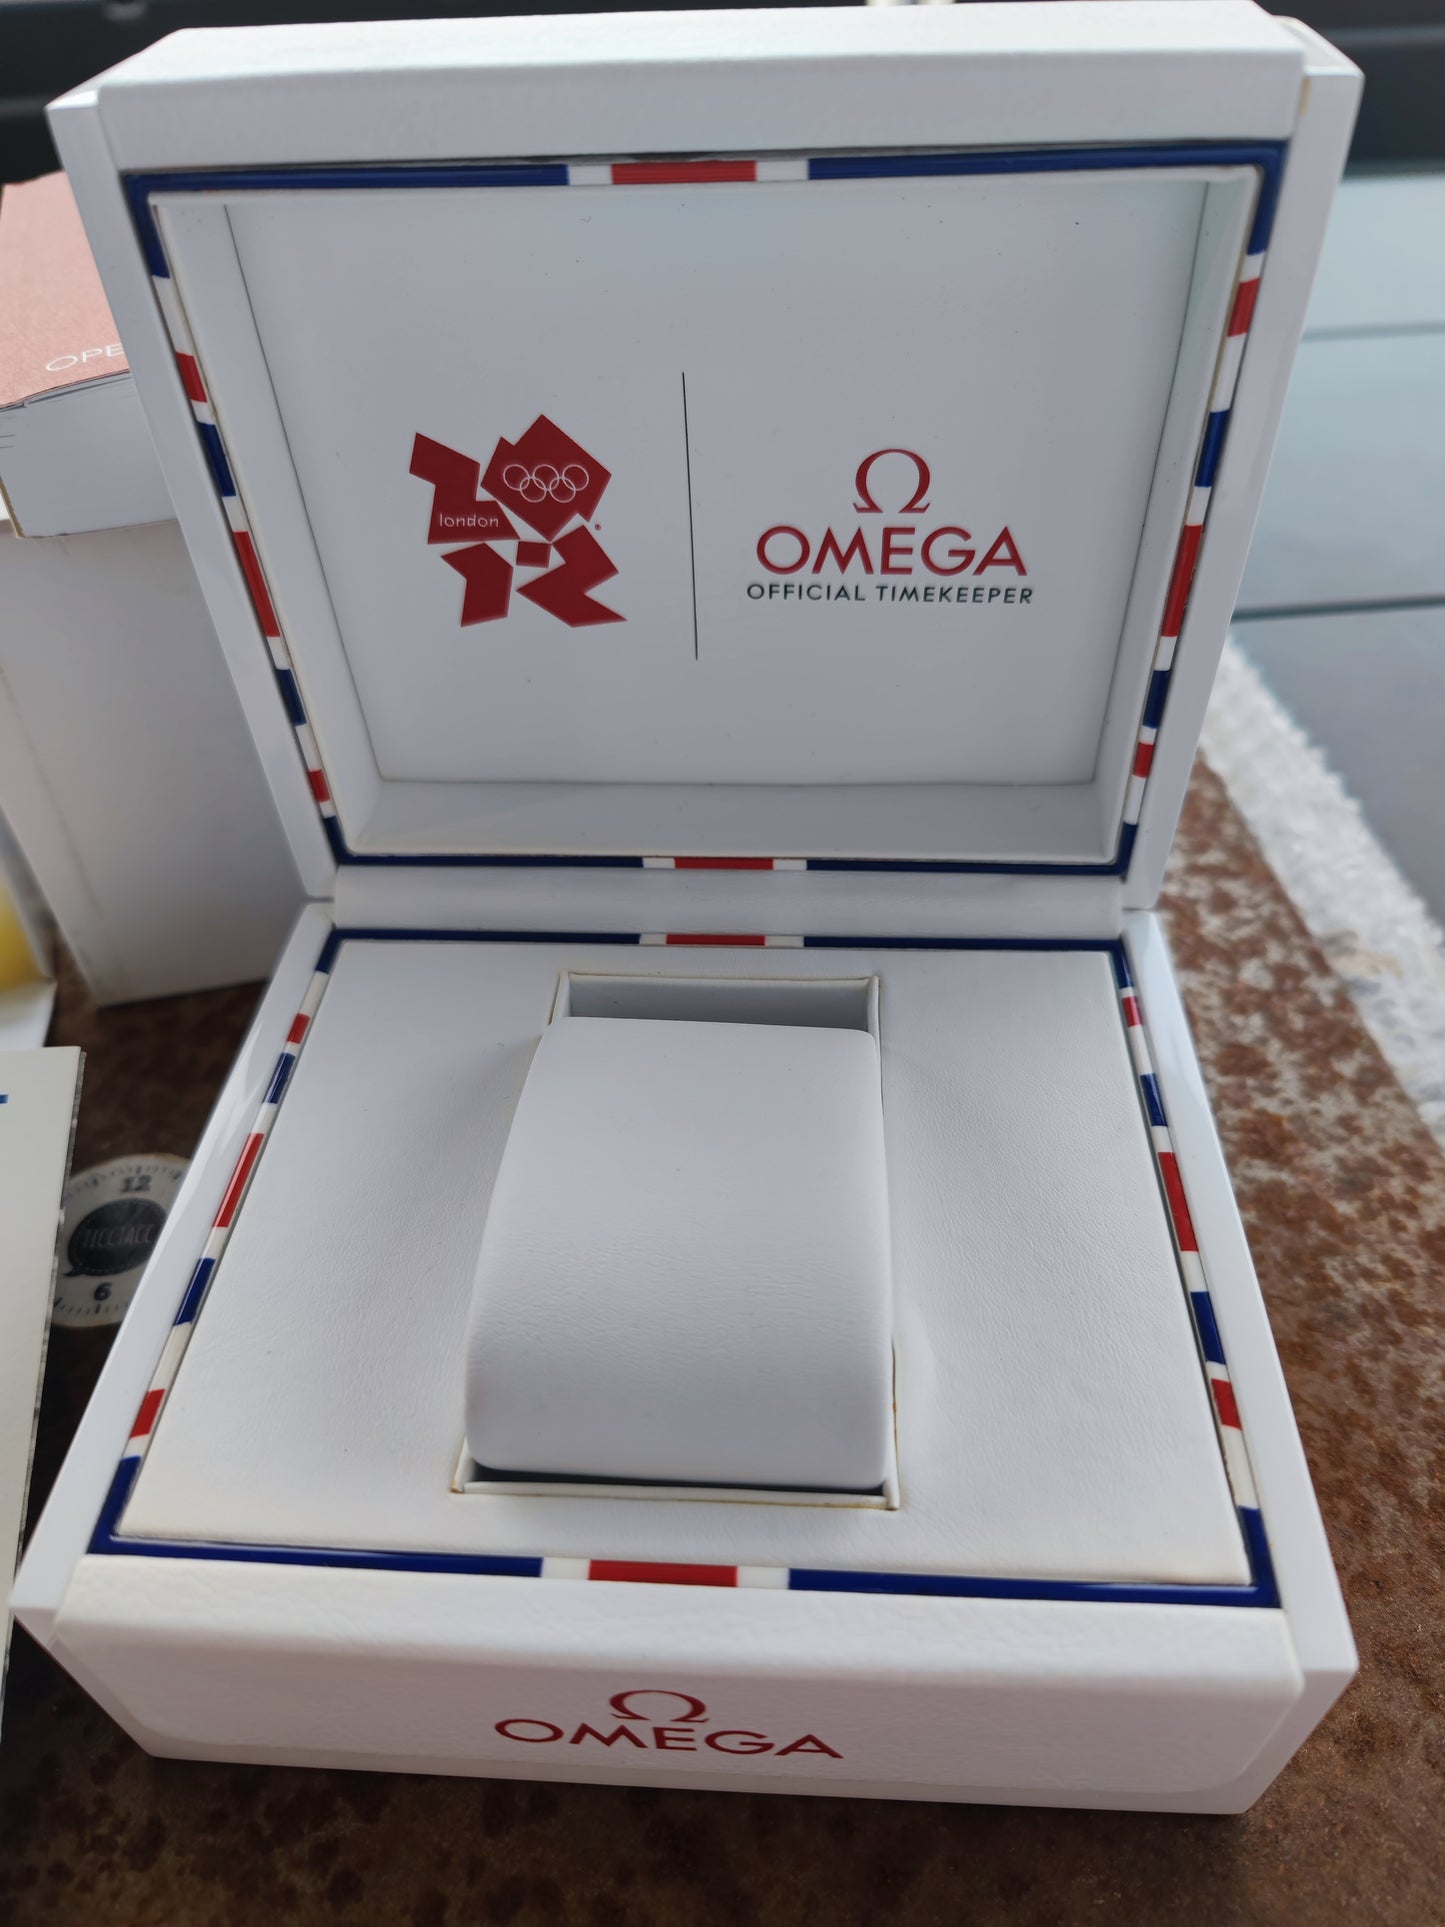 BOX Omega Co-Axial Ltd Edition Olympic Games 2012 London